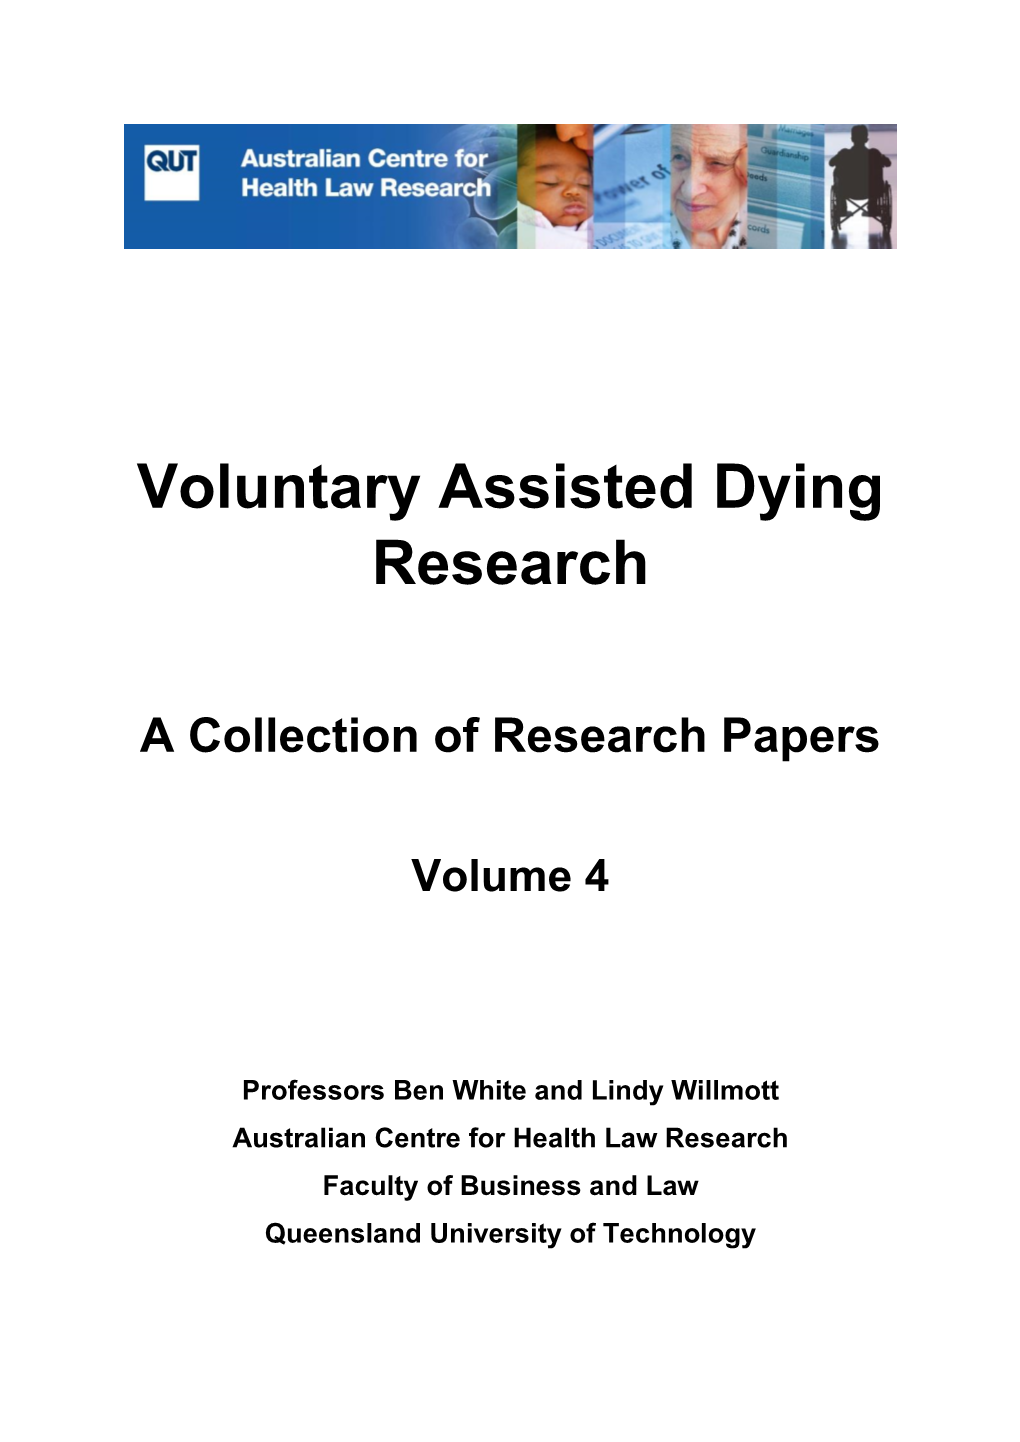 Voluntary Assisted Dying Research